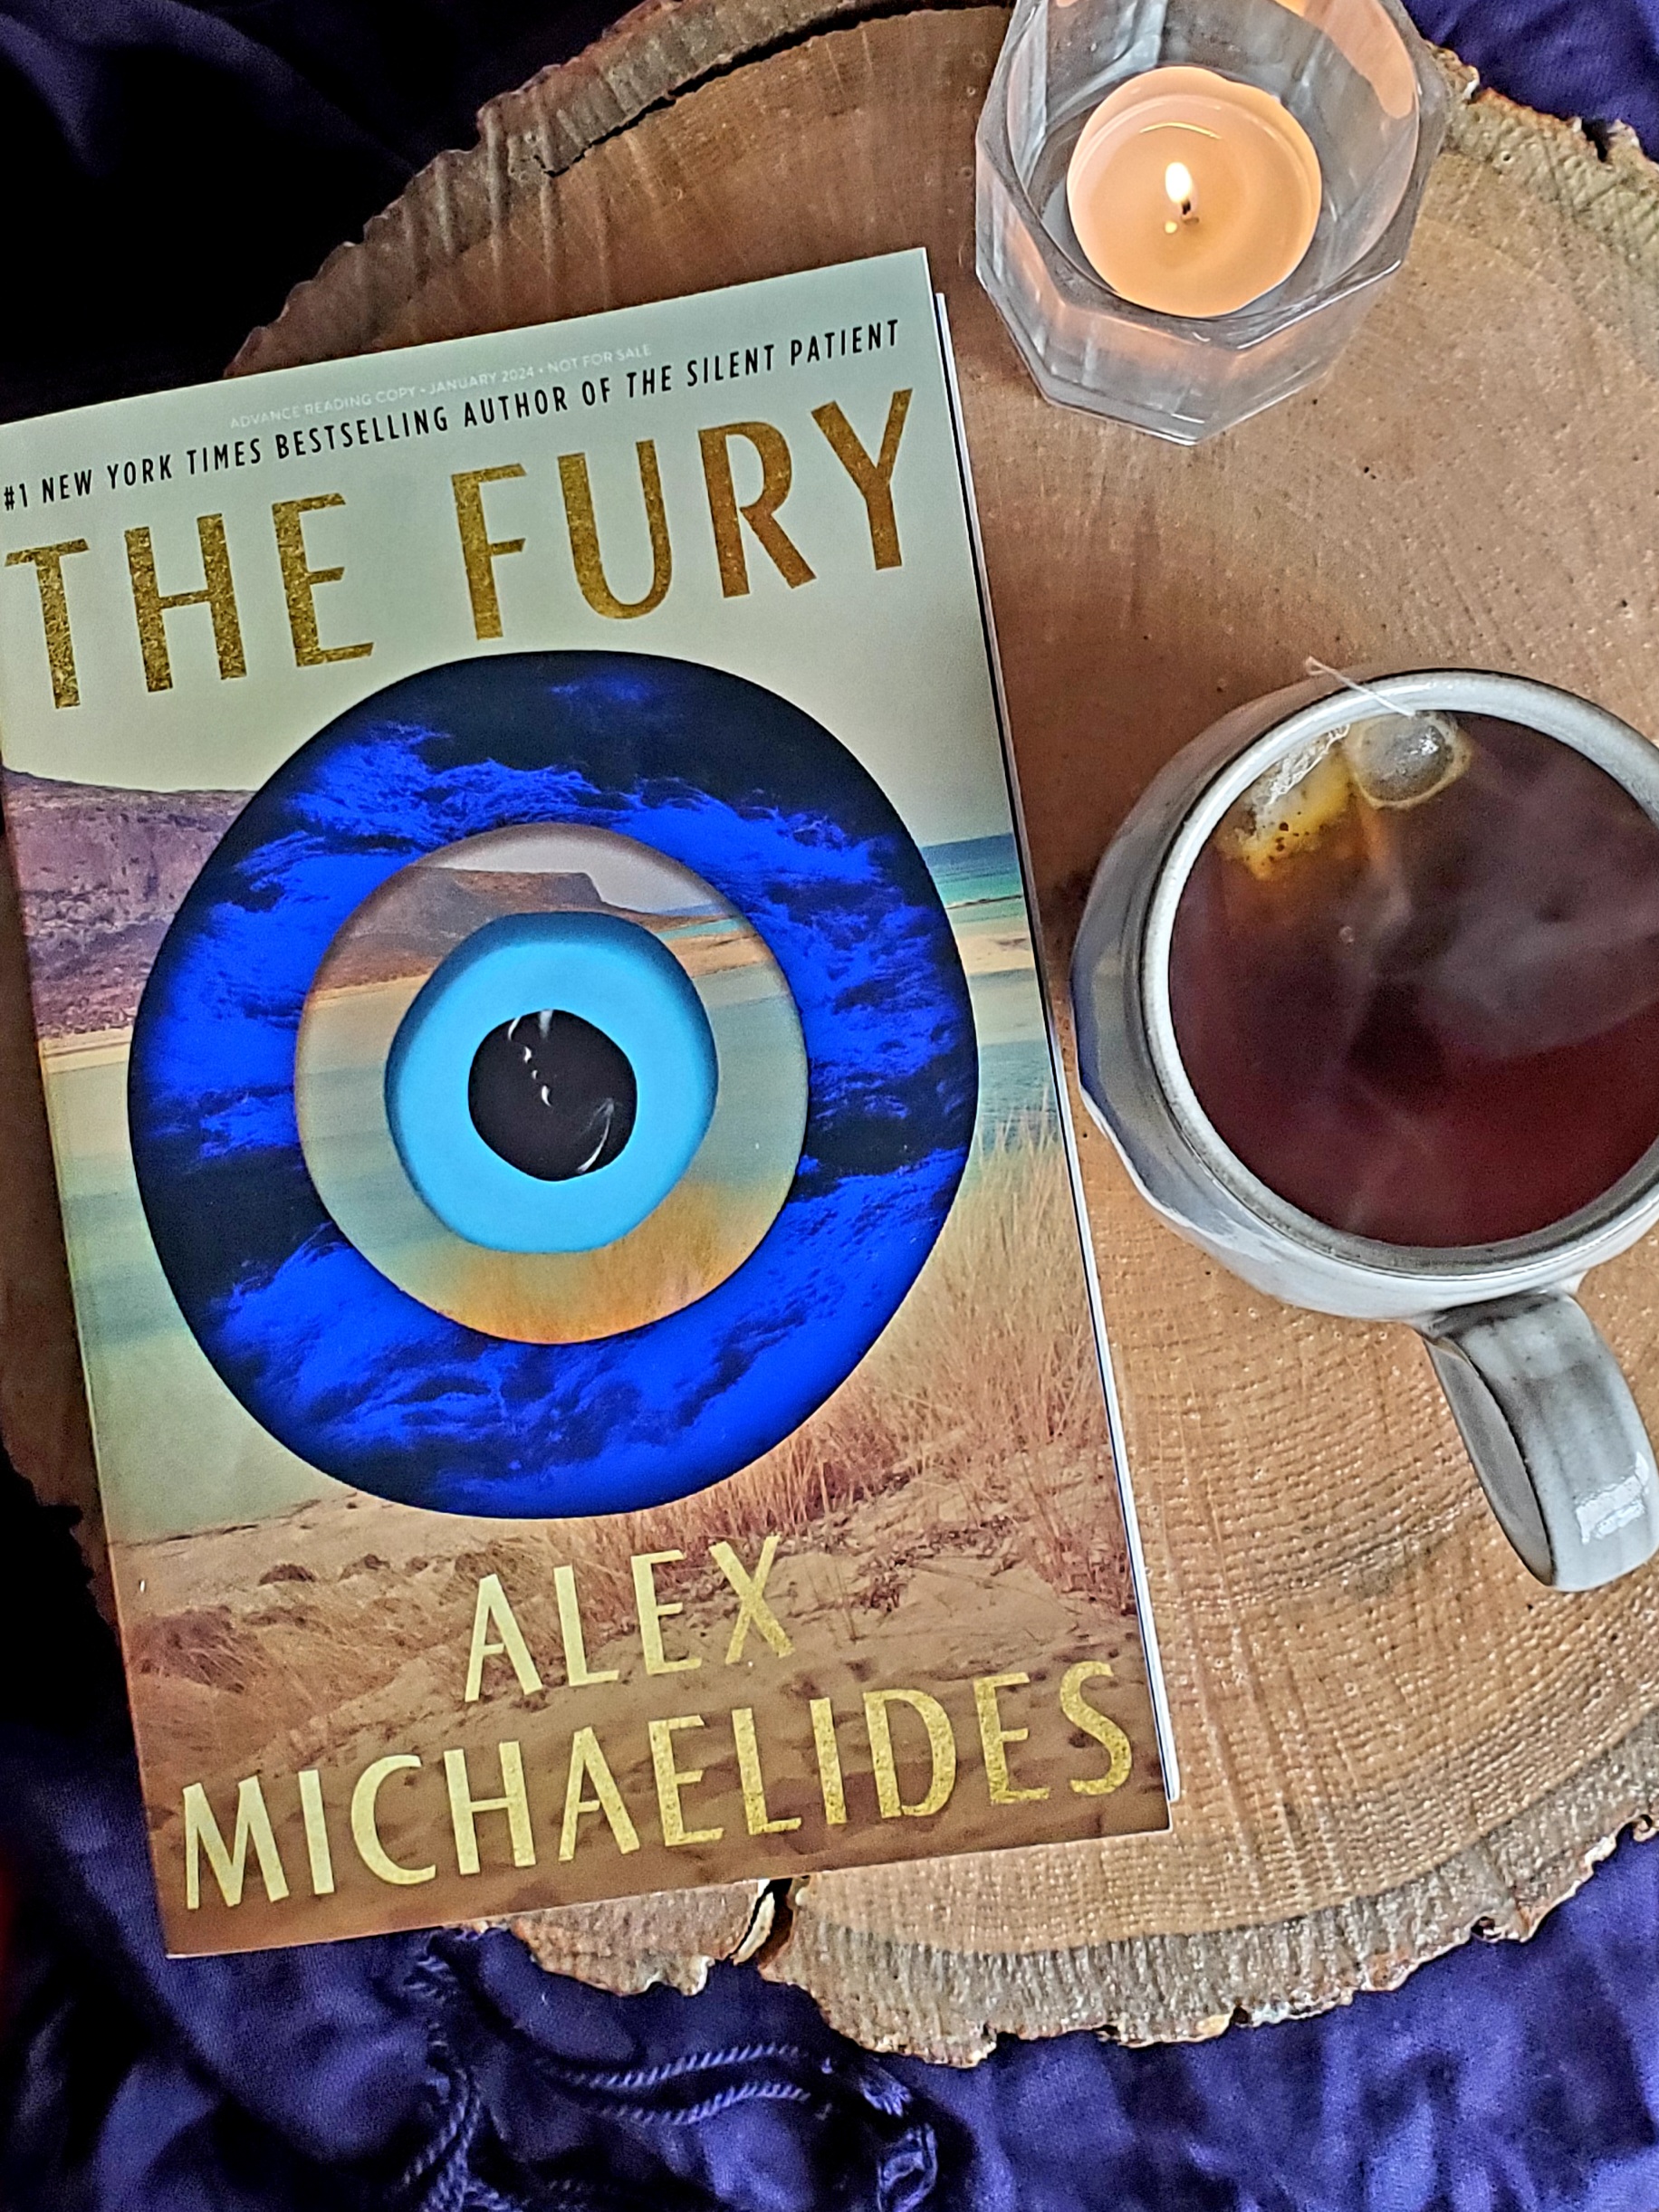 book cover for THE FURY by Alex Michaelides, mug of tea, candle